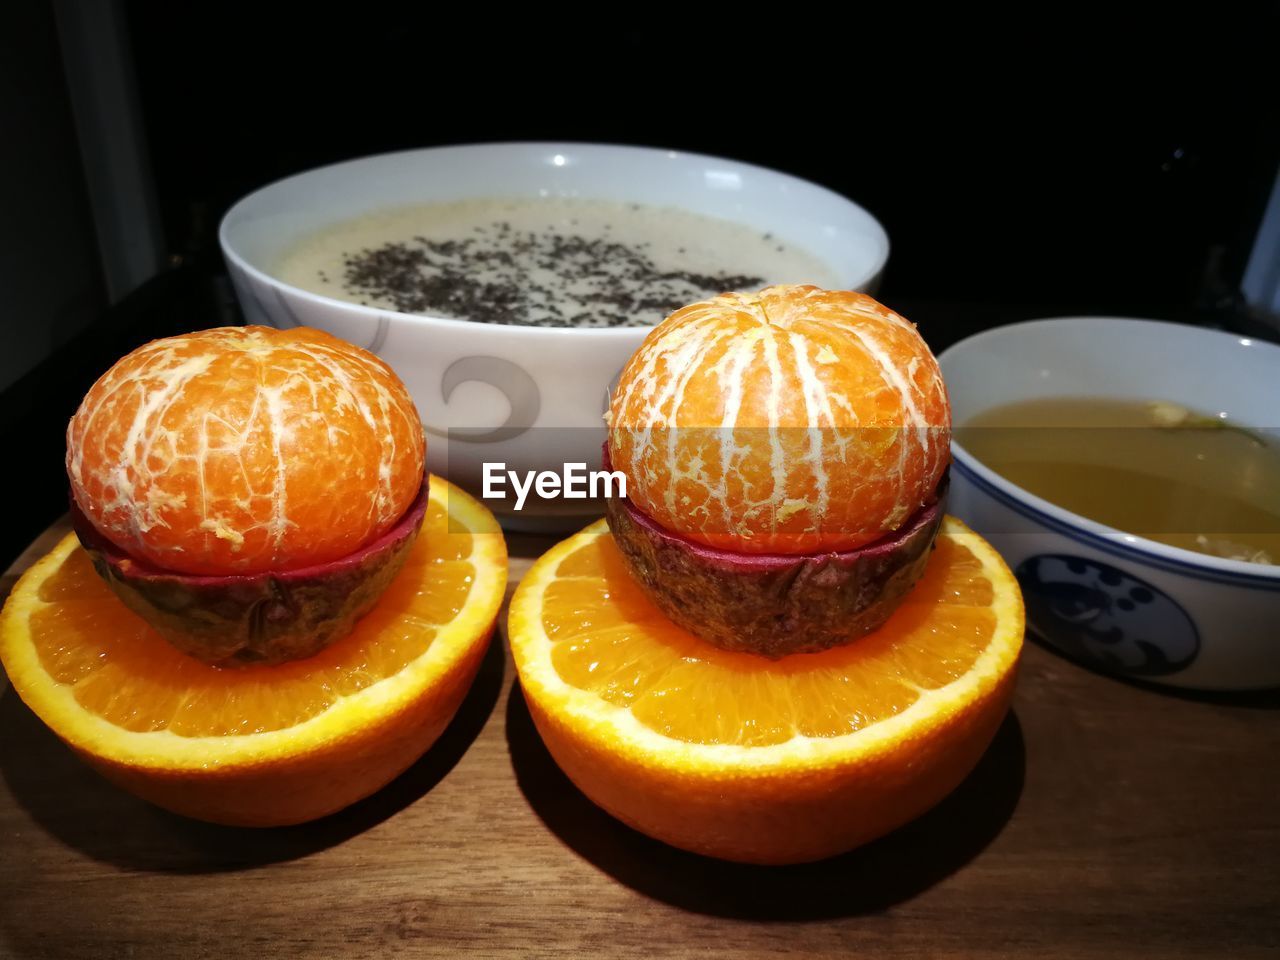 HIGH ANGLE VIEW OF ORANGE FRUITS IN PLATE ON TABLE